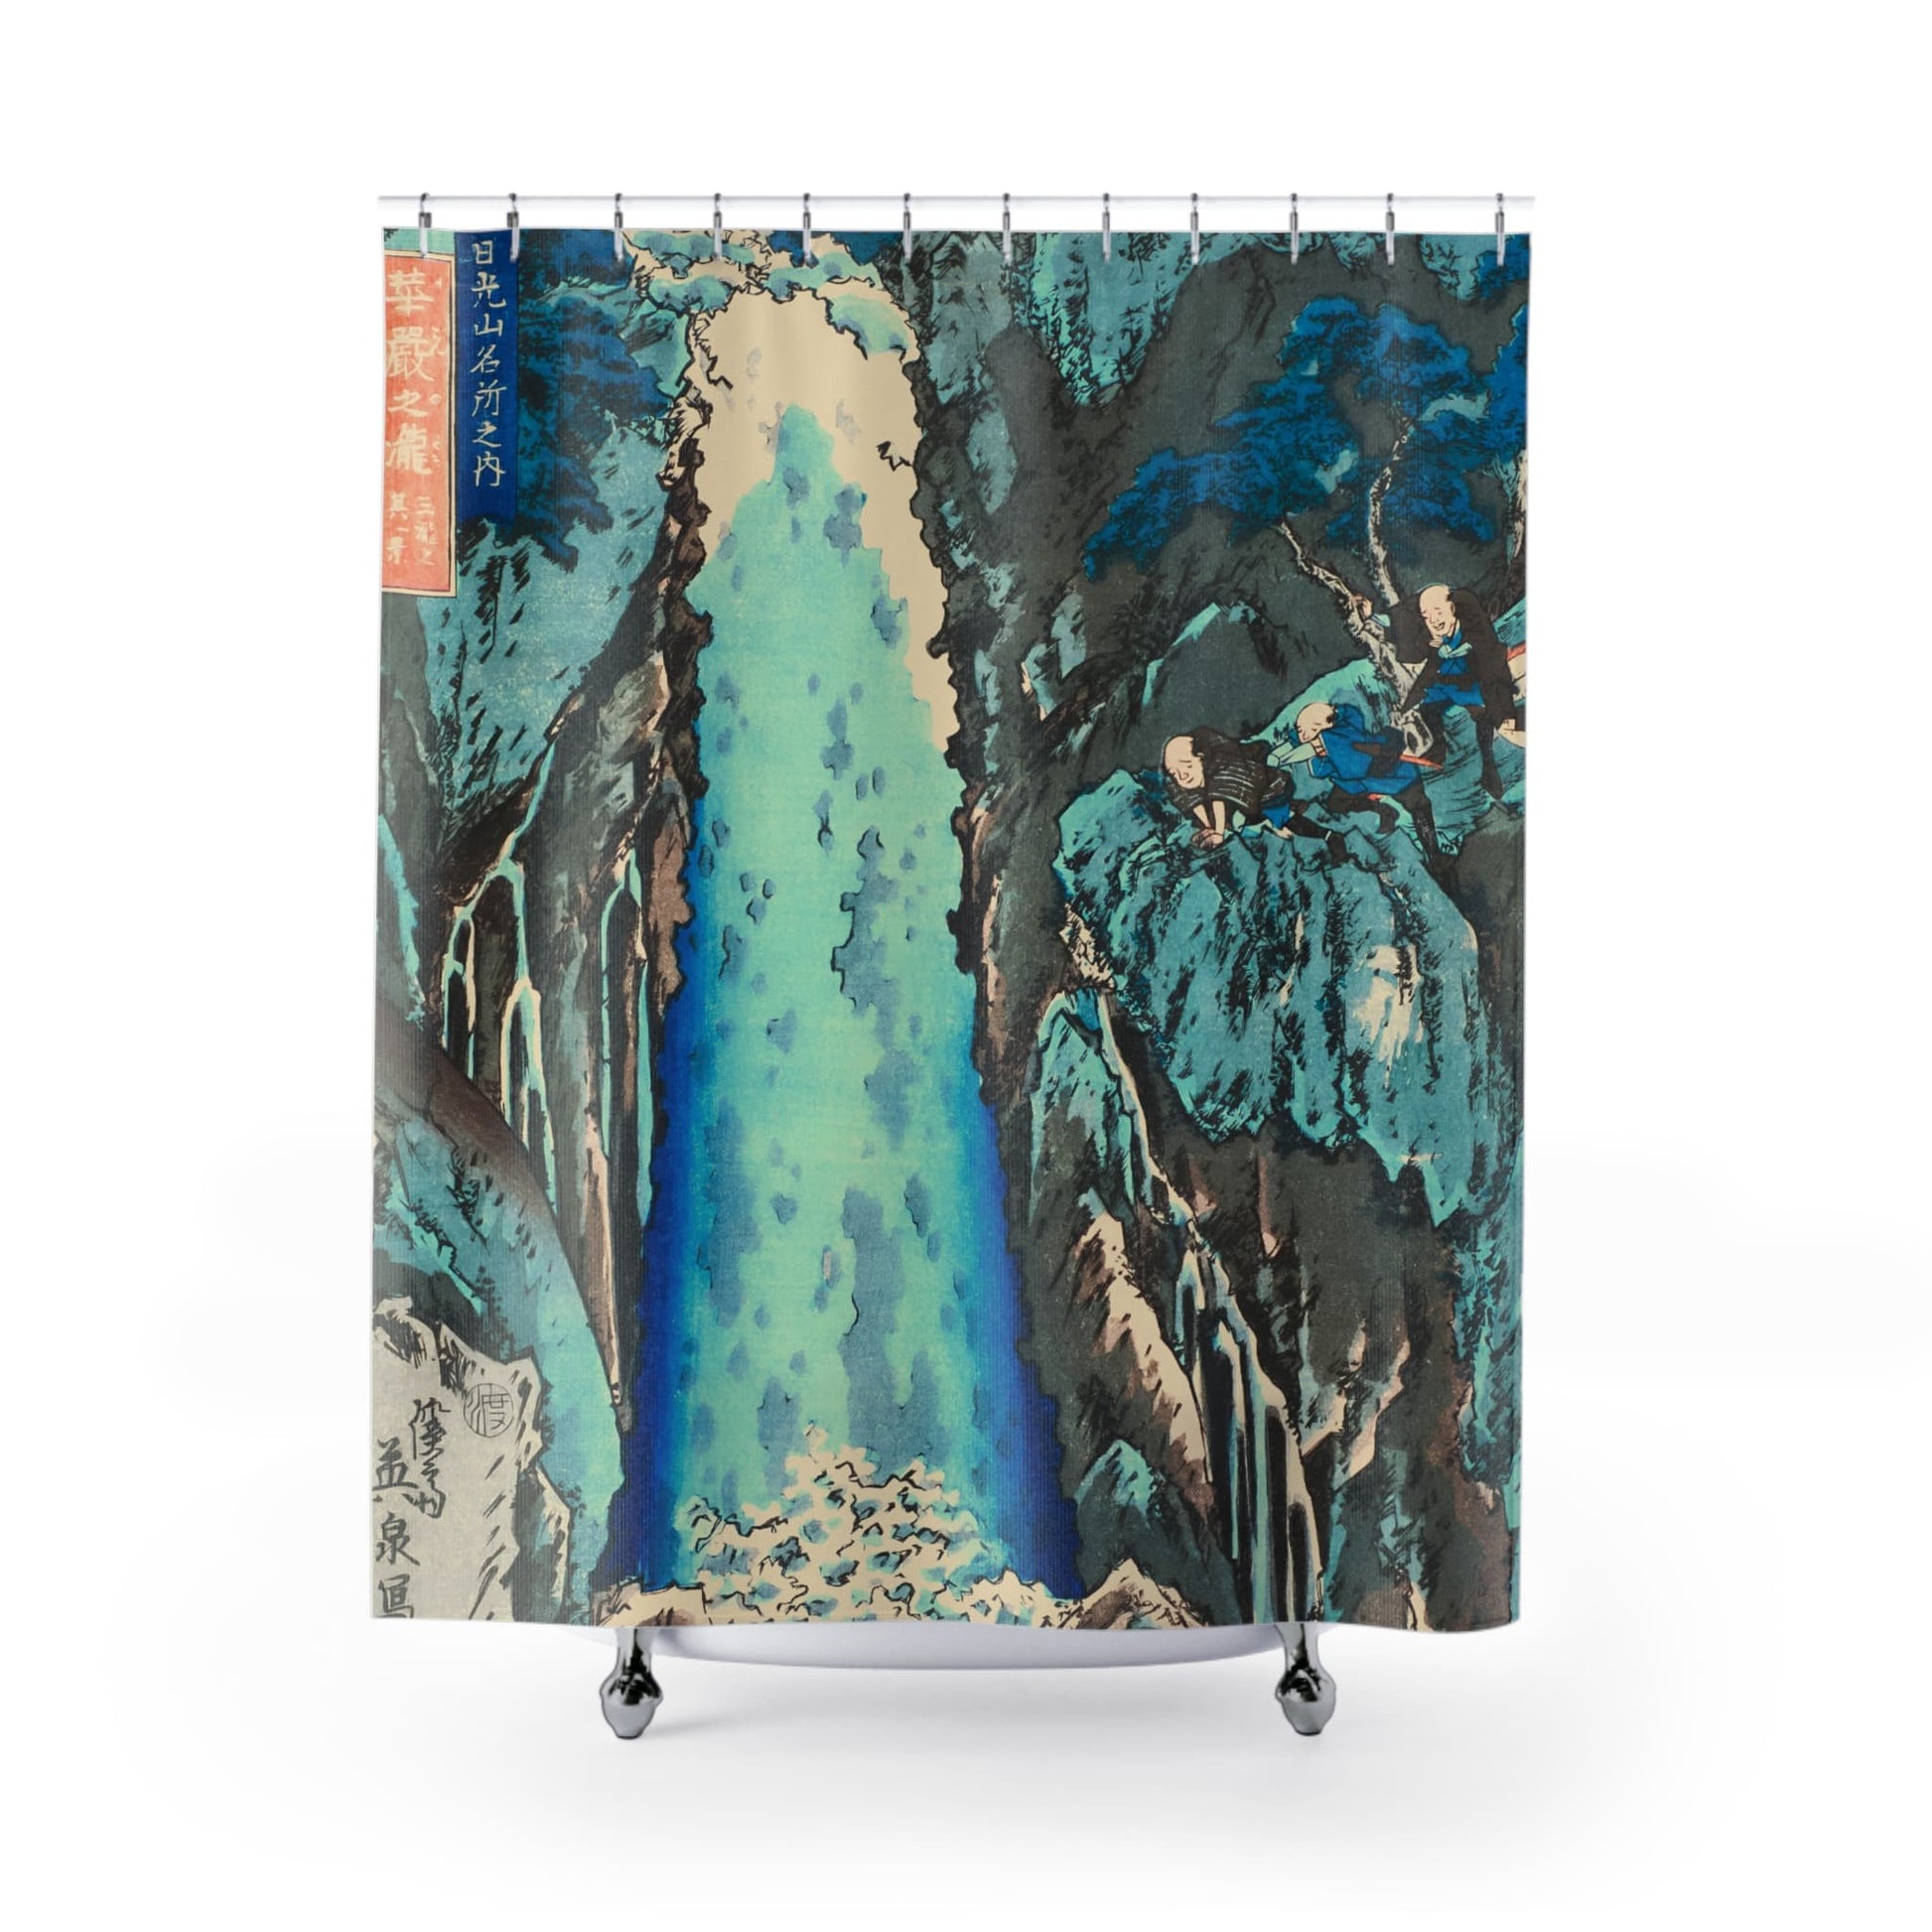 Light Blue Nature Shower Curtain with Japanese woodblock design, cultural bathroom decor showcasing traditional Japanese art.